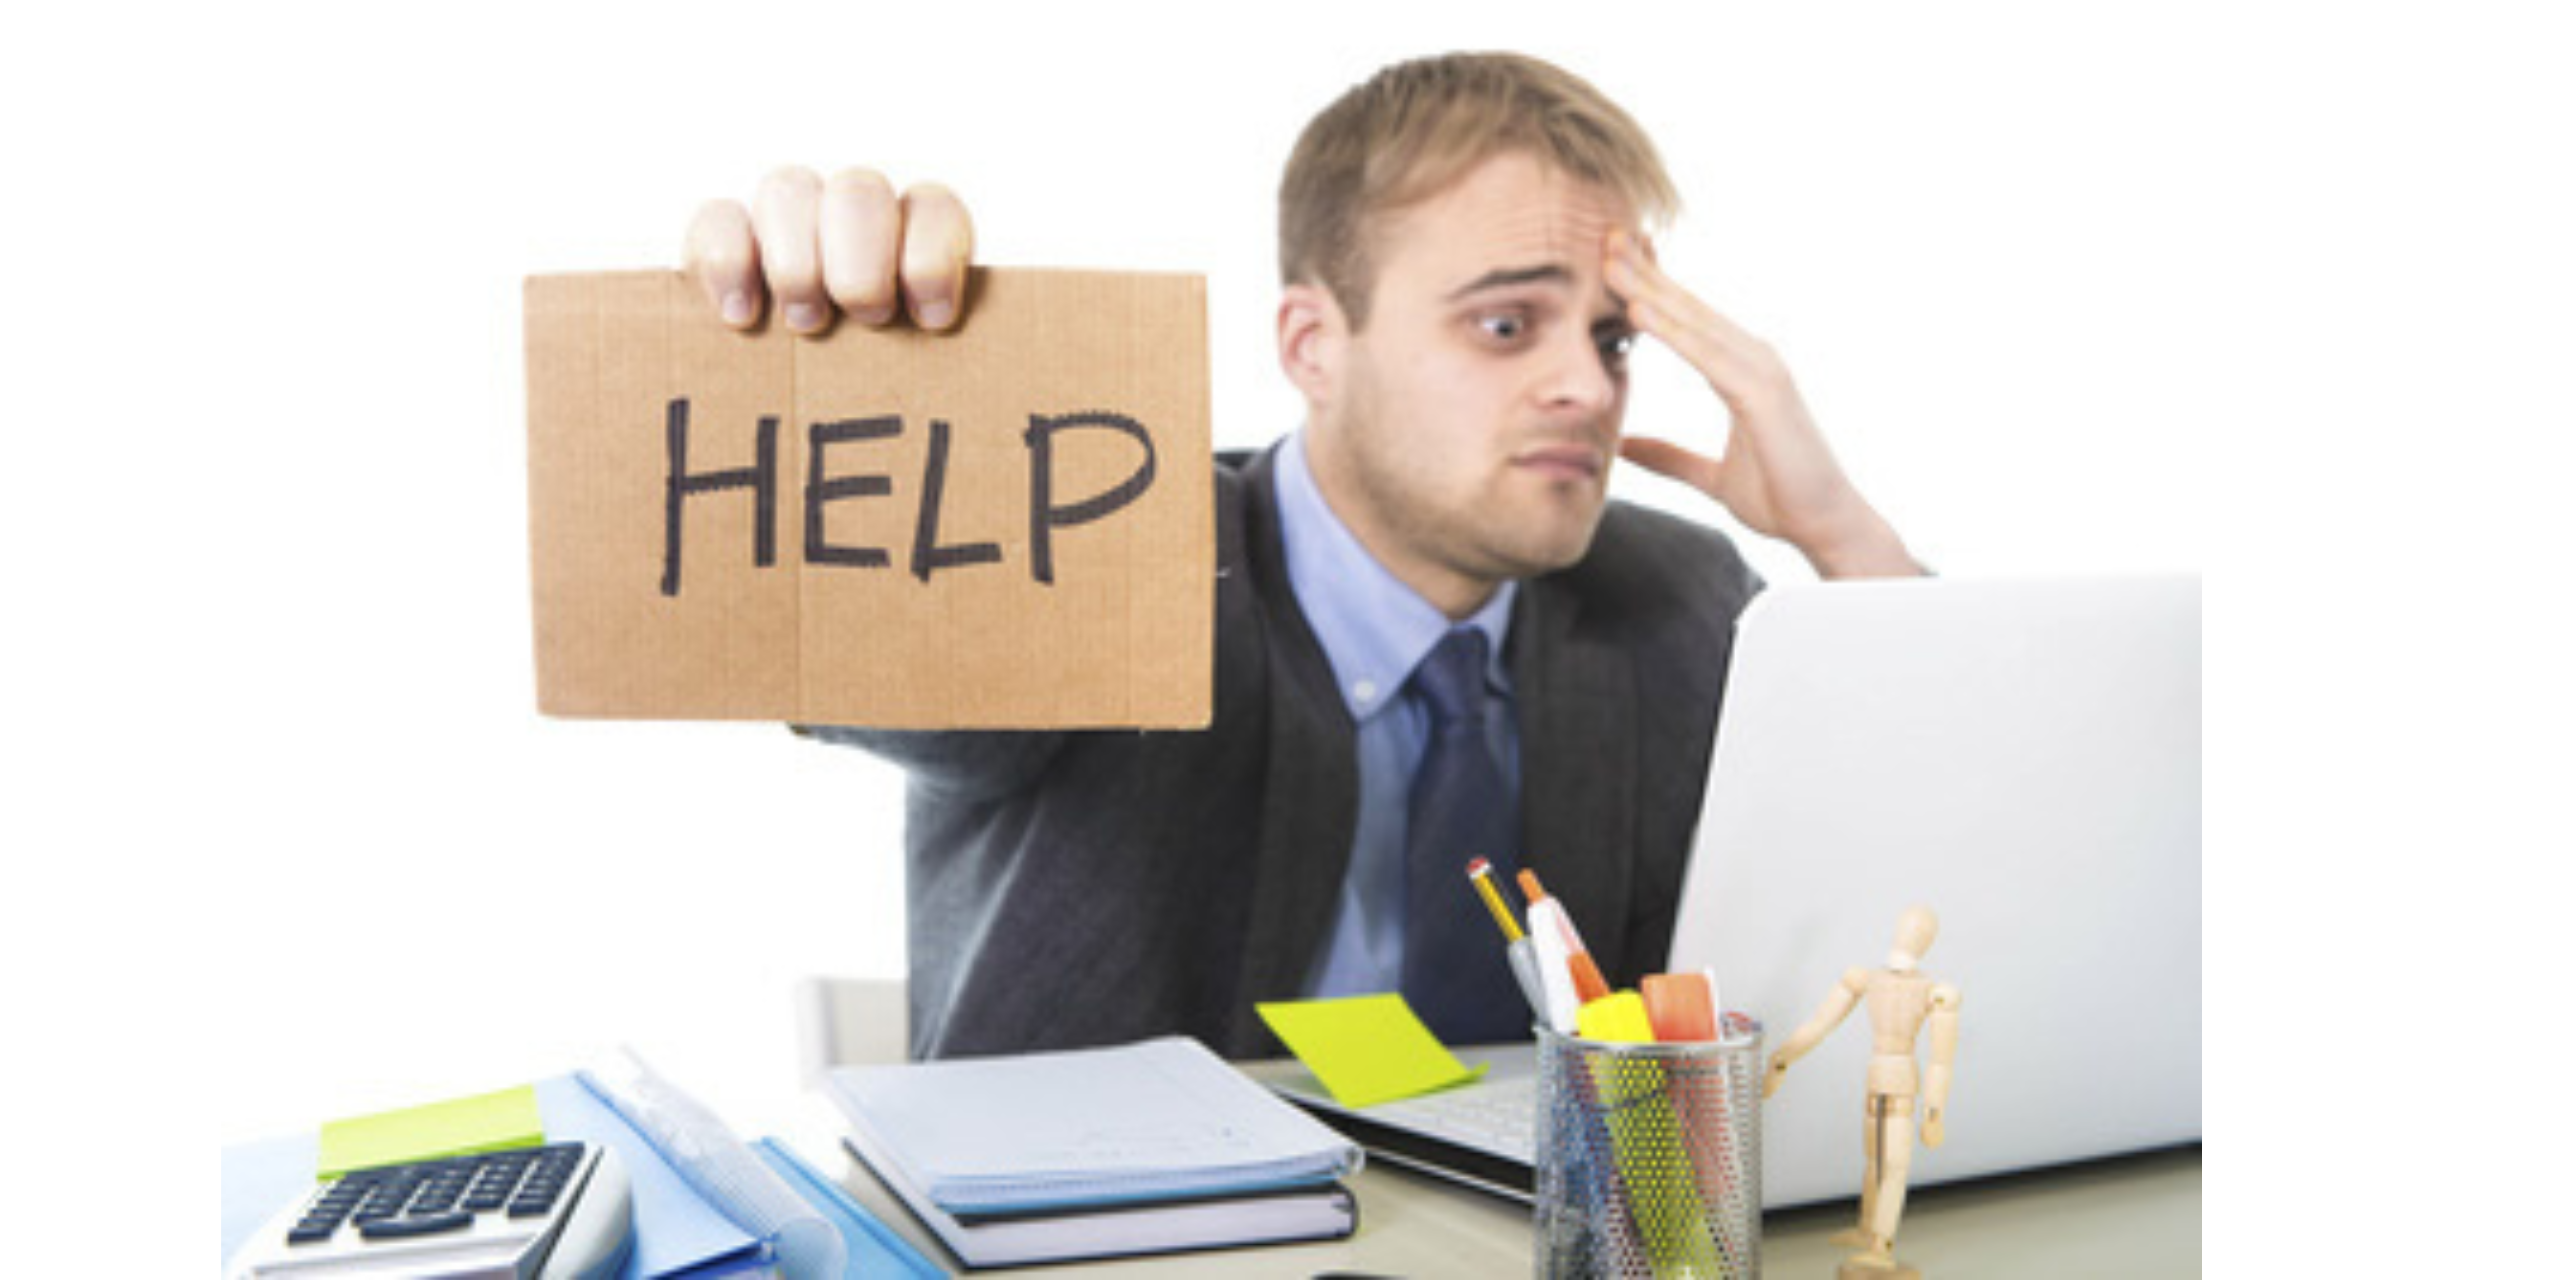 IT Headaches Got You Down? Unleash Peace of Mind with Candid8’s Help Desk Solutions!